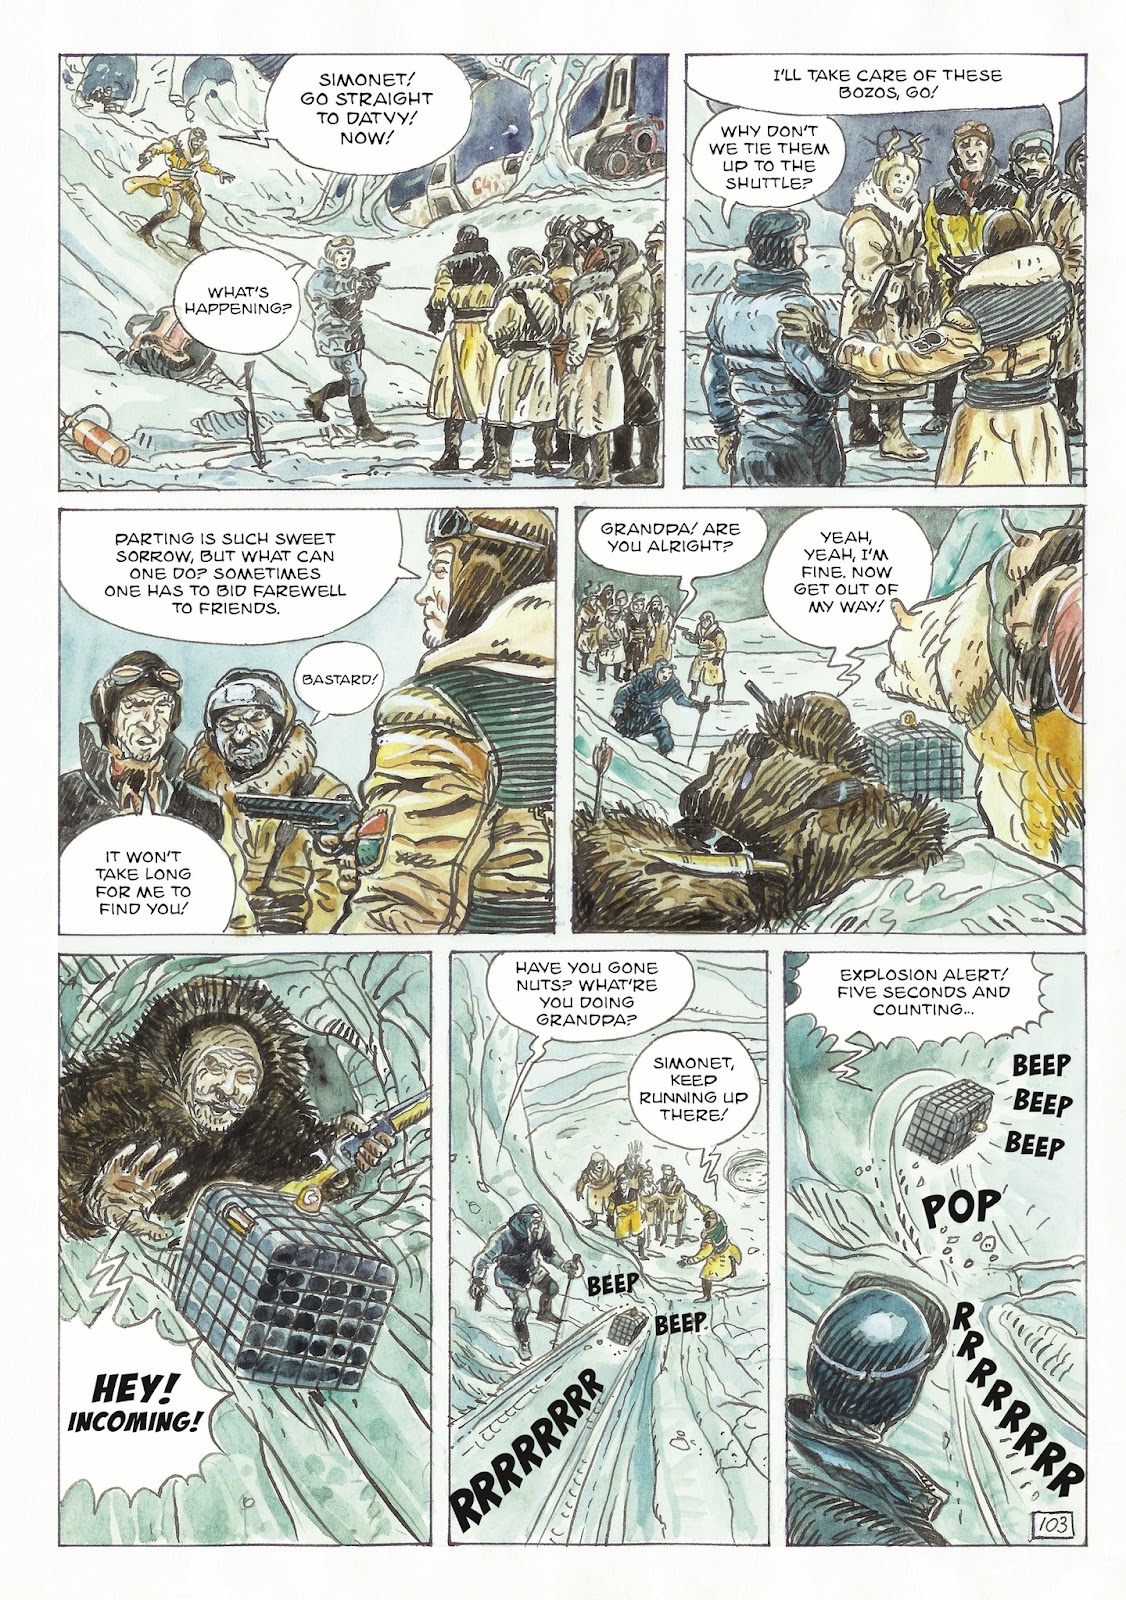 The Man With the Bear issue 2 - Page 49